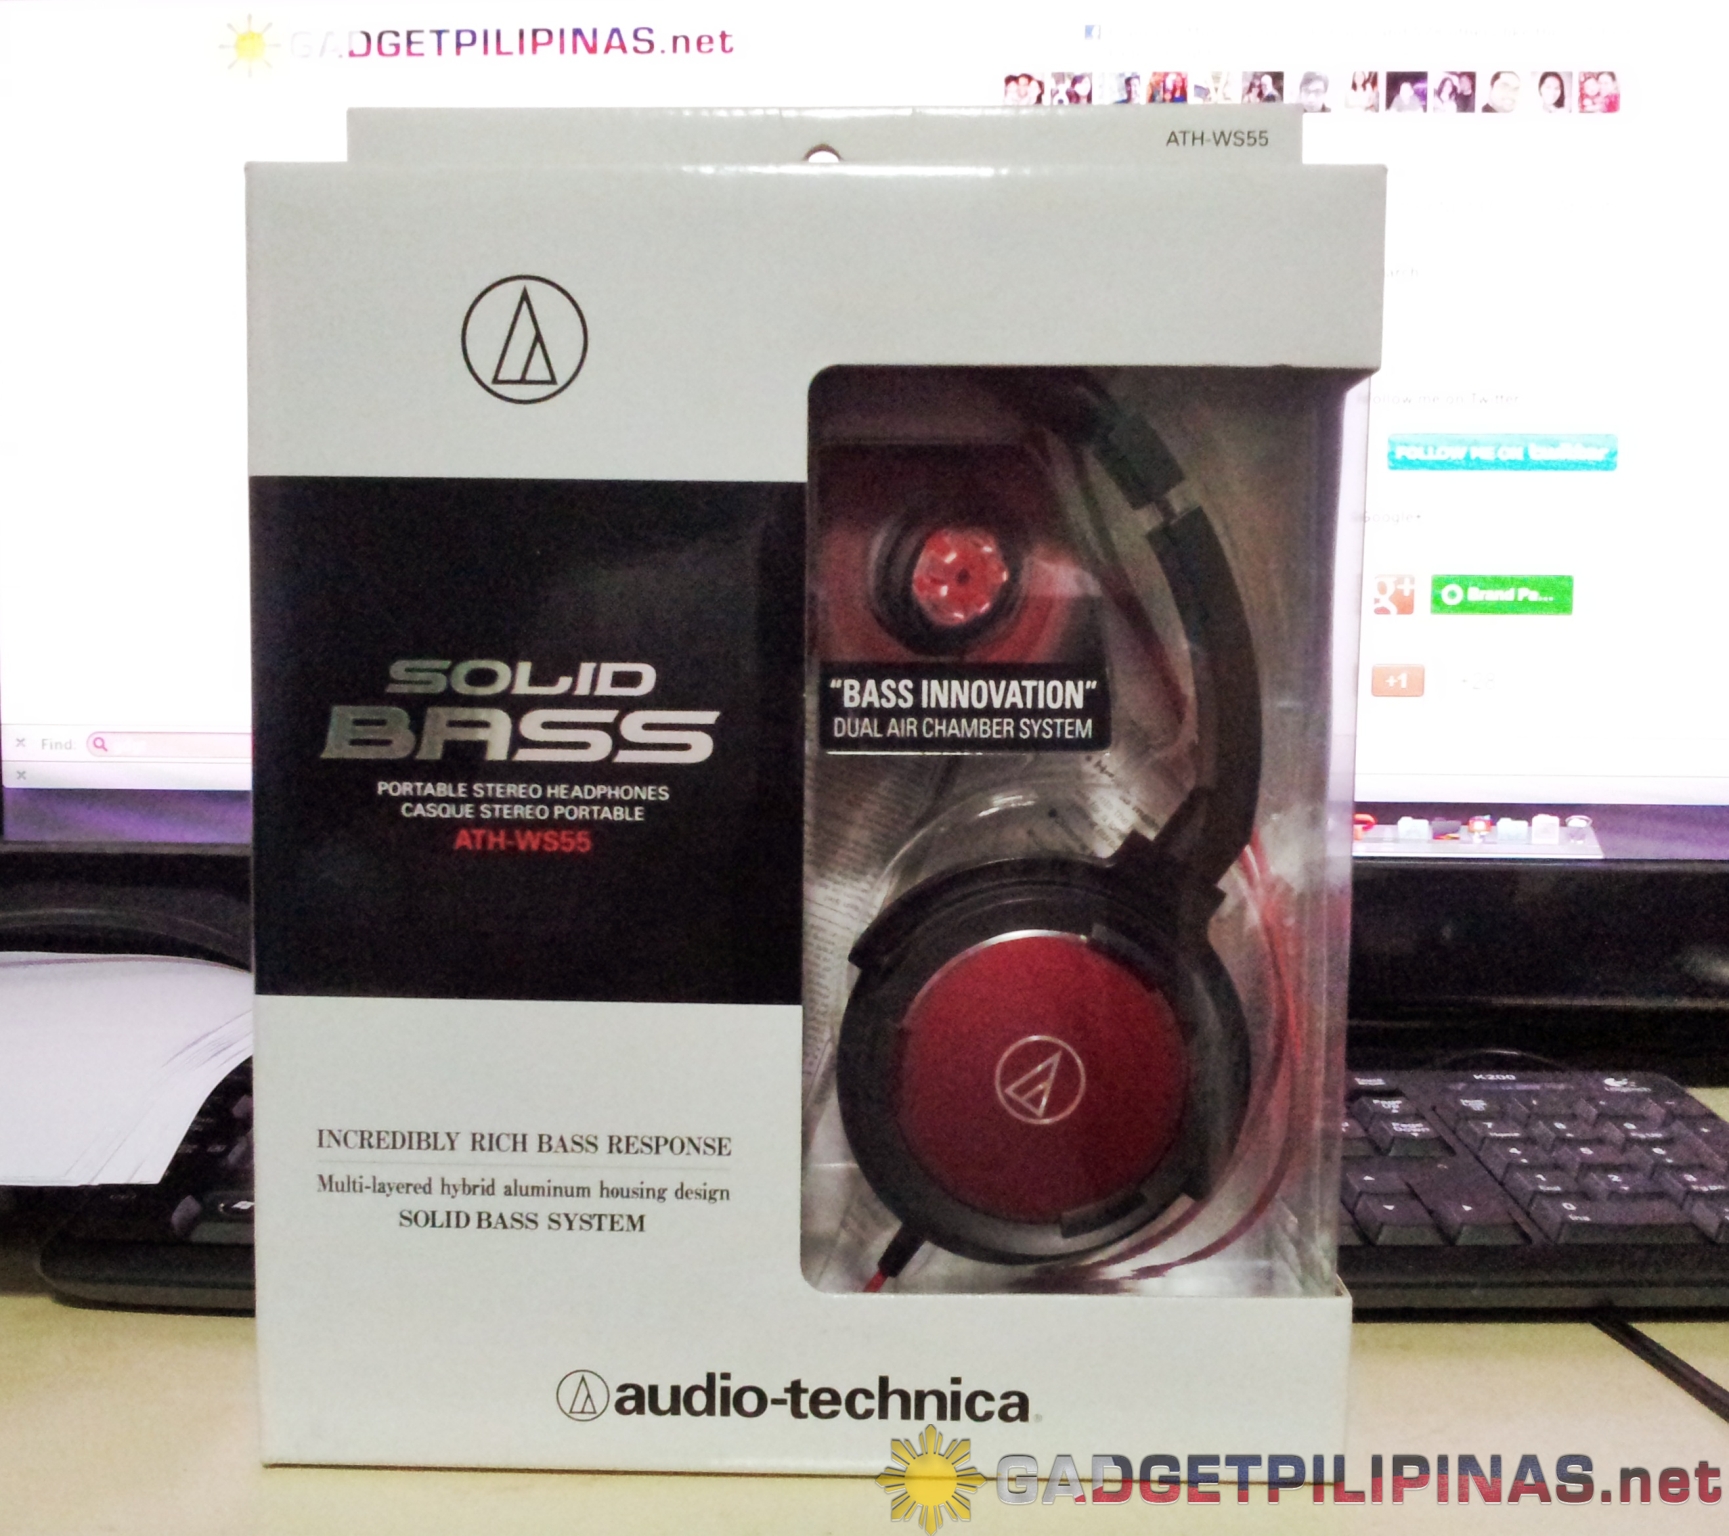 Audio-Technica ATH-WS55 Solid Bass Headphone Review